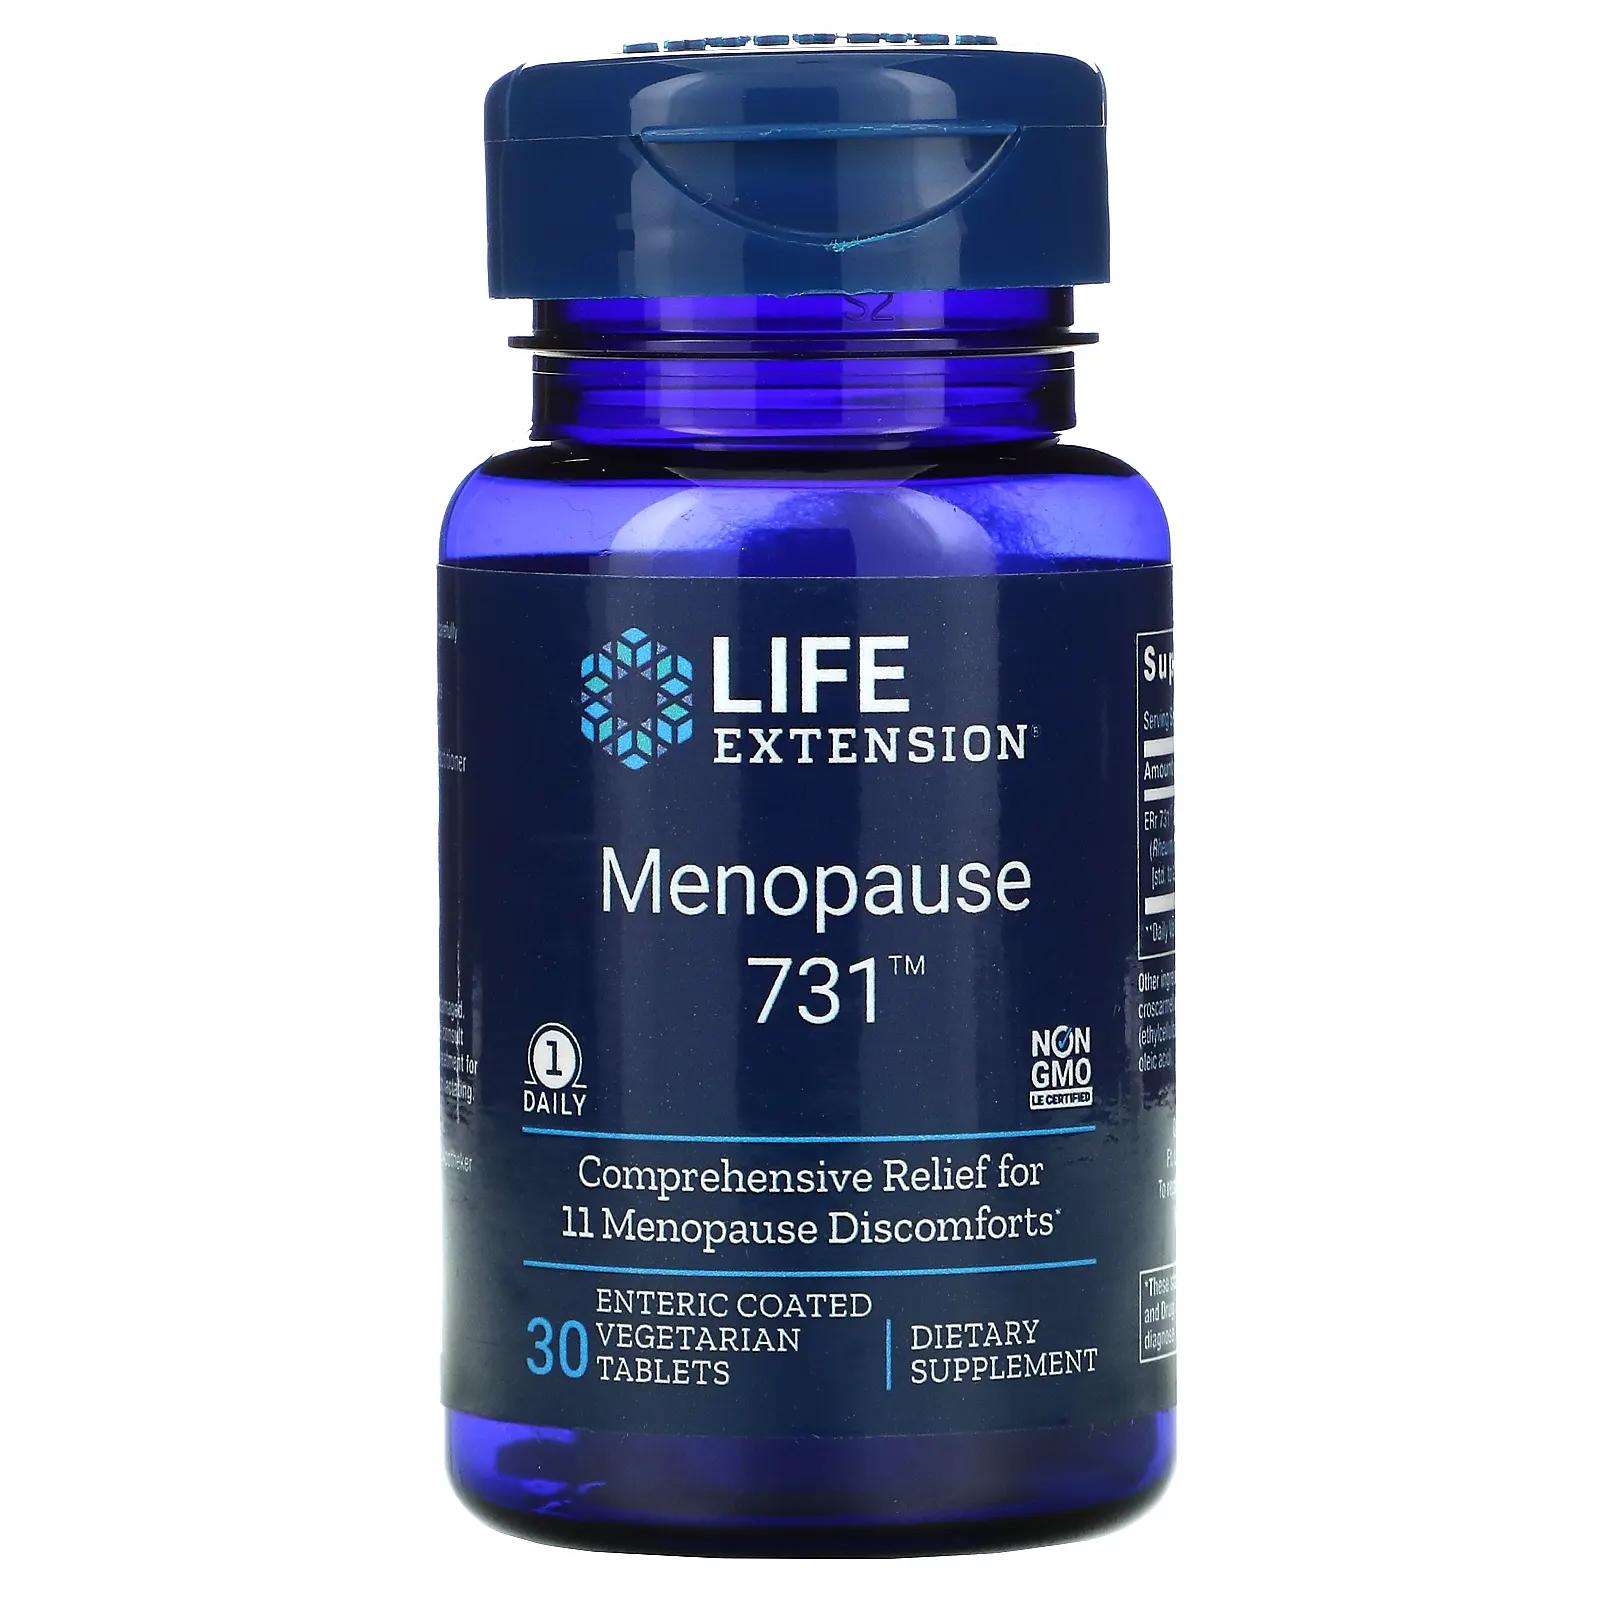 life extension life extension mix tablets 240 tablets Life Extension Menopause 731 30 Enteric Coated Vegetarian Tablets